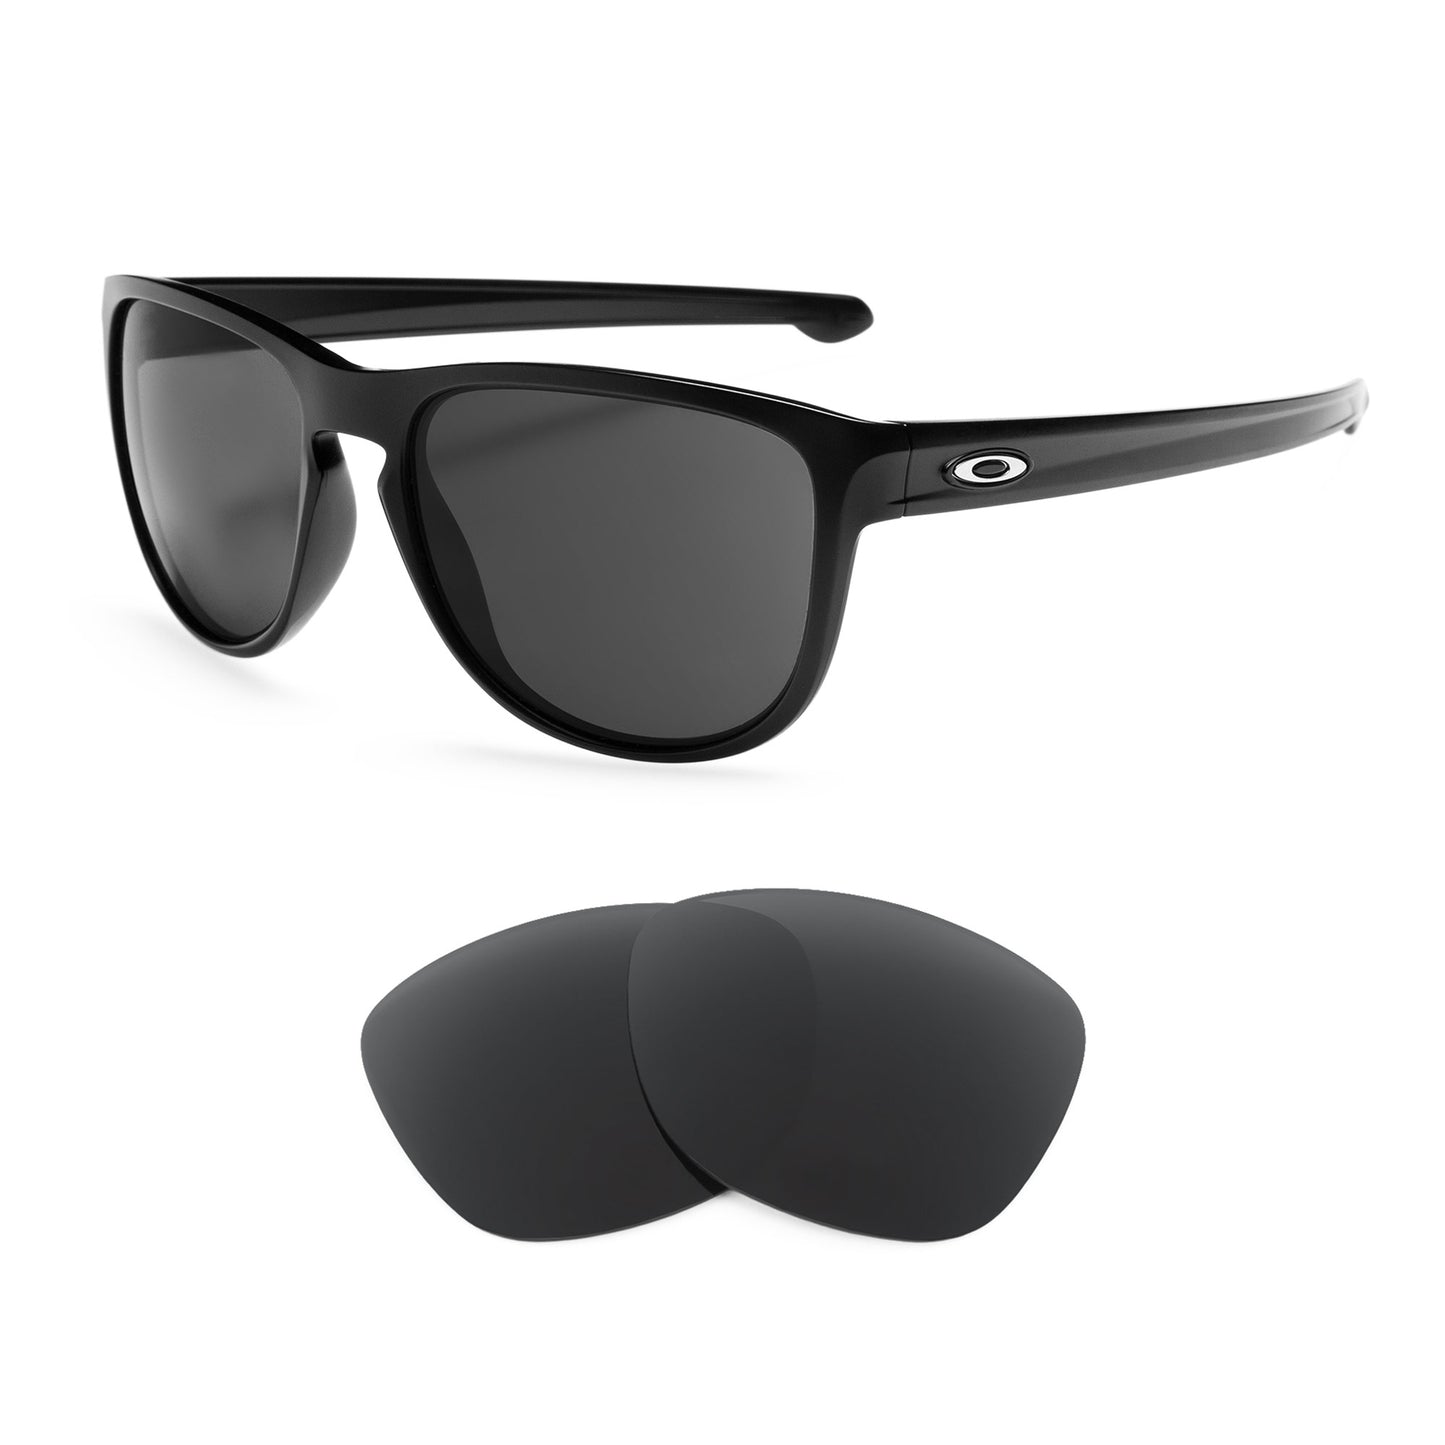 Oakley Sliver R sunglasses with replacement lenses